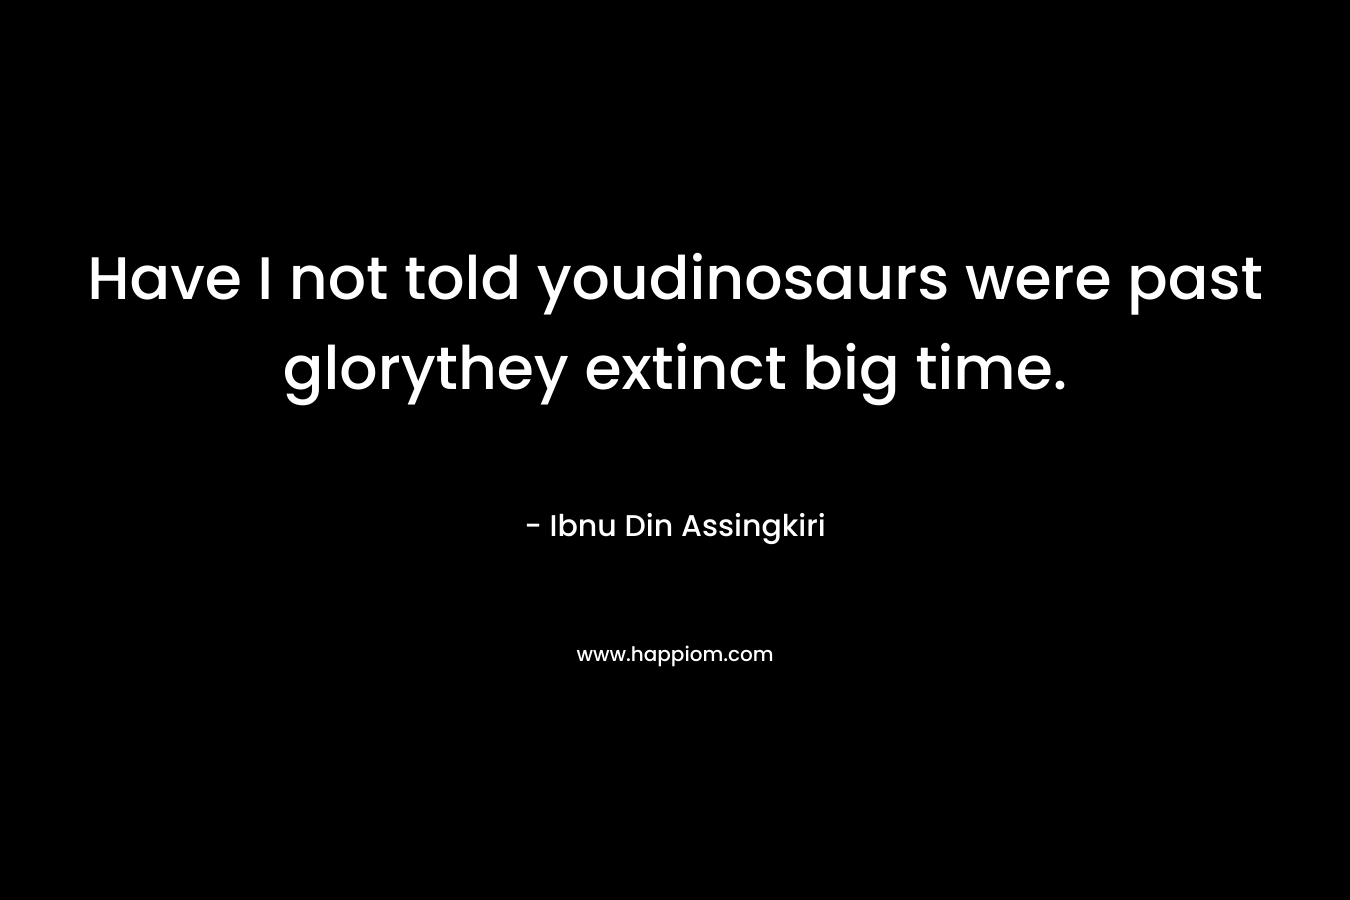 Have I not told youdinosaurs were past glorythey extinct big time. – Ibnu Din Assingkiri